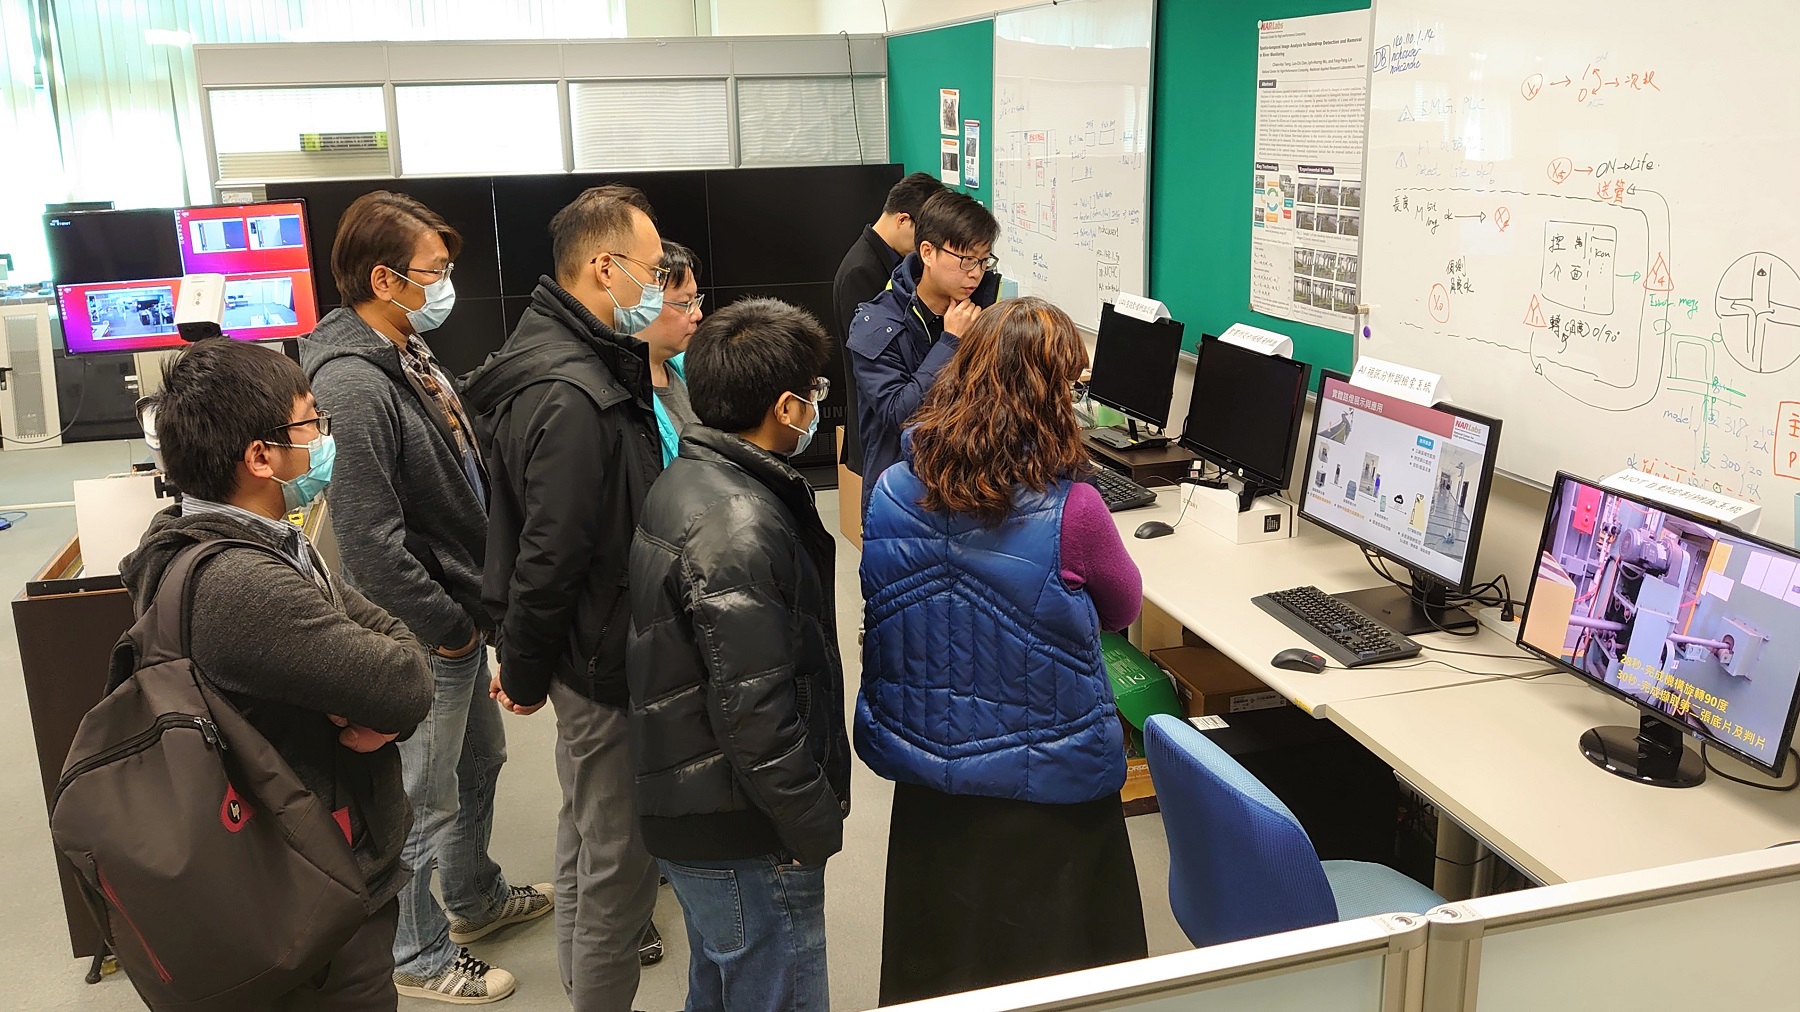 A visit to Smart City and IoT Lab, Intelligent Application Division. Both parties share thoughts on the showcase technologies.